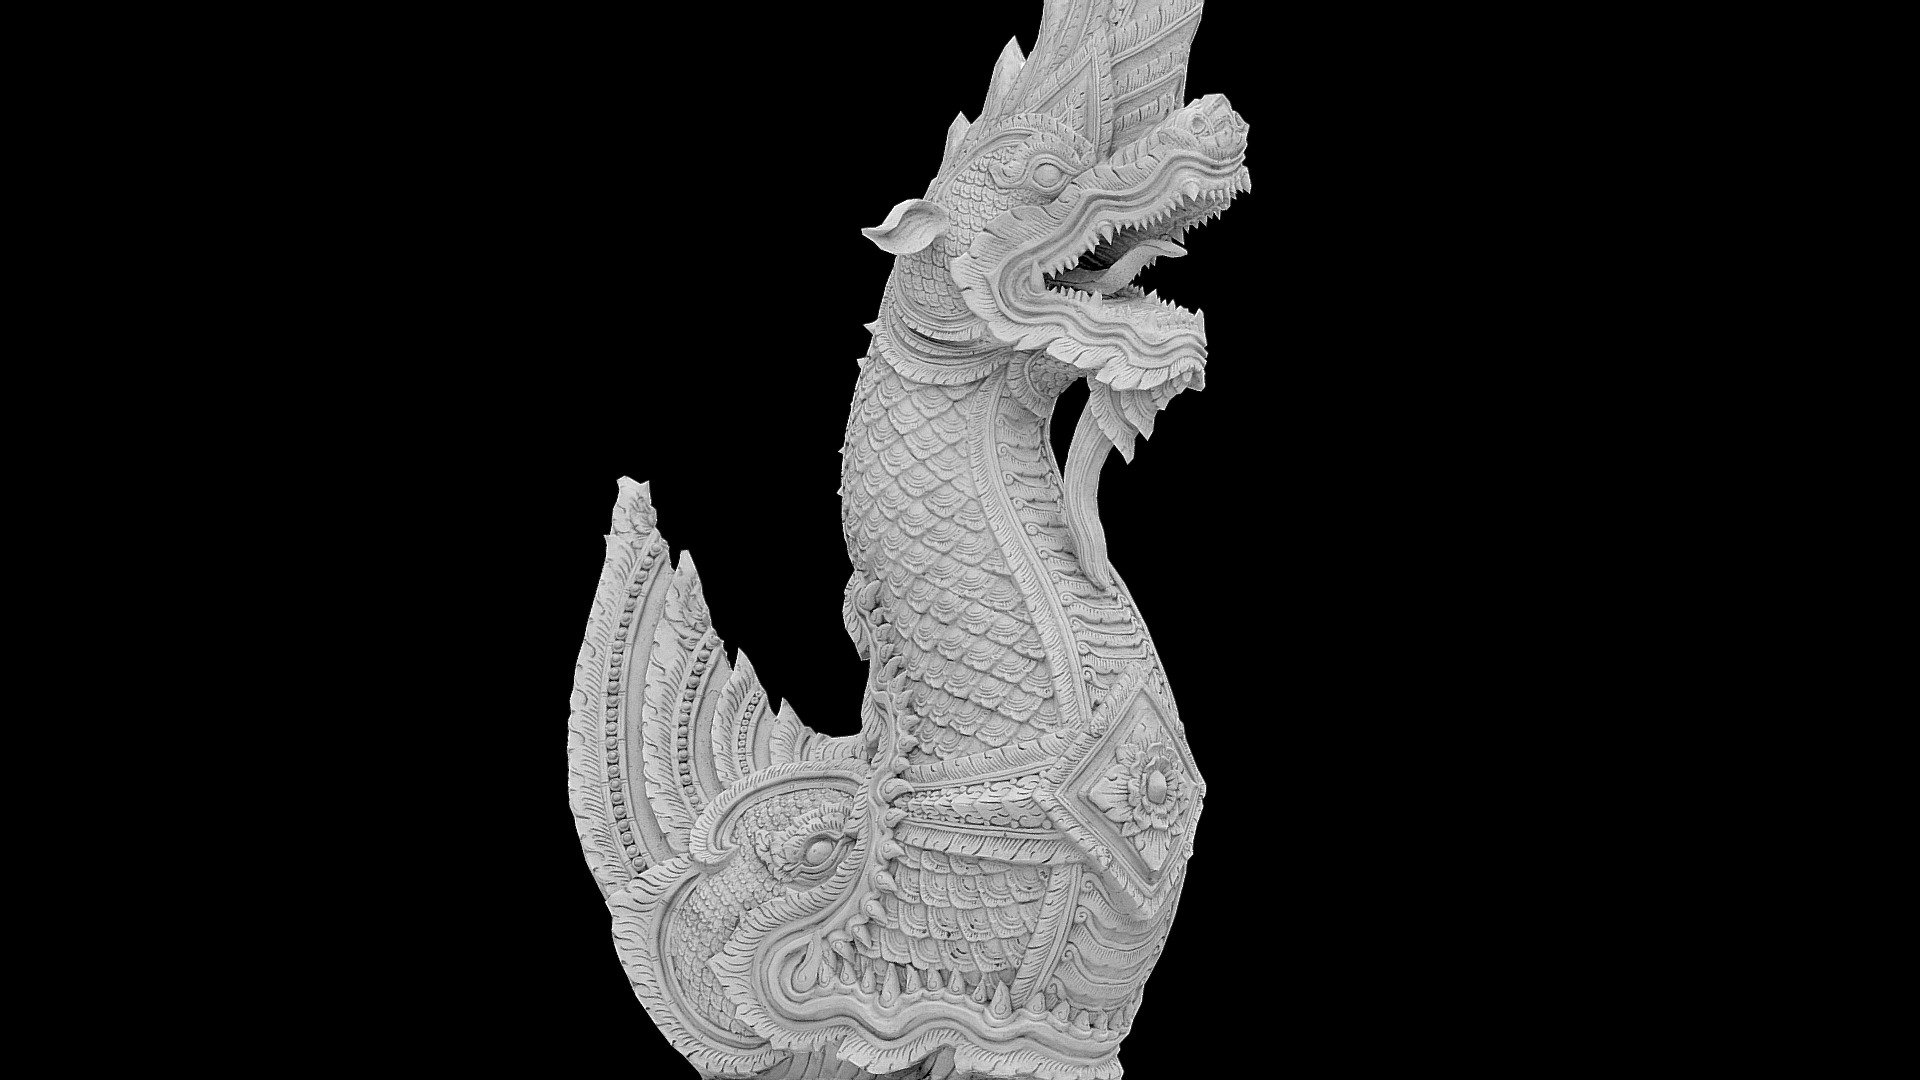 Low poly version of the final model created for the Competition: Dragons Around the World. 1st Place Model 3D Entries.
https://www.capturingreality.com/Article-RCdragons-winners

I´ve picked this amazing Thai Dragon, located at the entrance of a Buddhist Temple. Location; https://goo.gl/maps/VQsGwqfxuYB2

Model created in Reality Capture.
Due to the weather and lighting condictions, I had to cover the hole model in two differents days which game me different lighting situations results, there for I decided that since the model in real life is fully black and white, post processing all the images to B&amp;W removing the colors, were the perfect way to avoid those lighting and colors to interfeer into the final model. Created from 695 images (Canon SL1- 18-55mm).

Finally I would love to thank the organizers of this challenge, and to all of those 3D scanning enthusiast, that promote photogrammetry, pushing every day its infinite possibilities even further!! 3d model